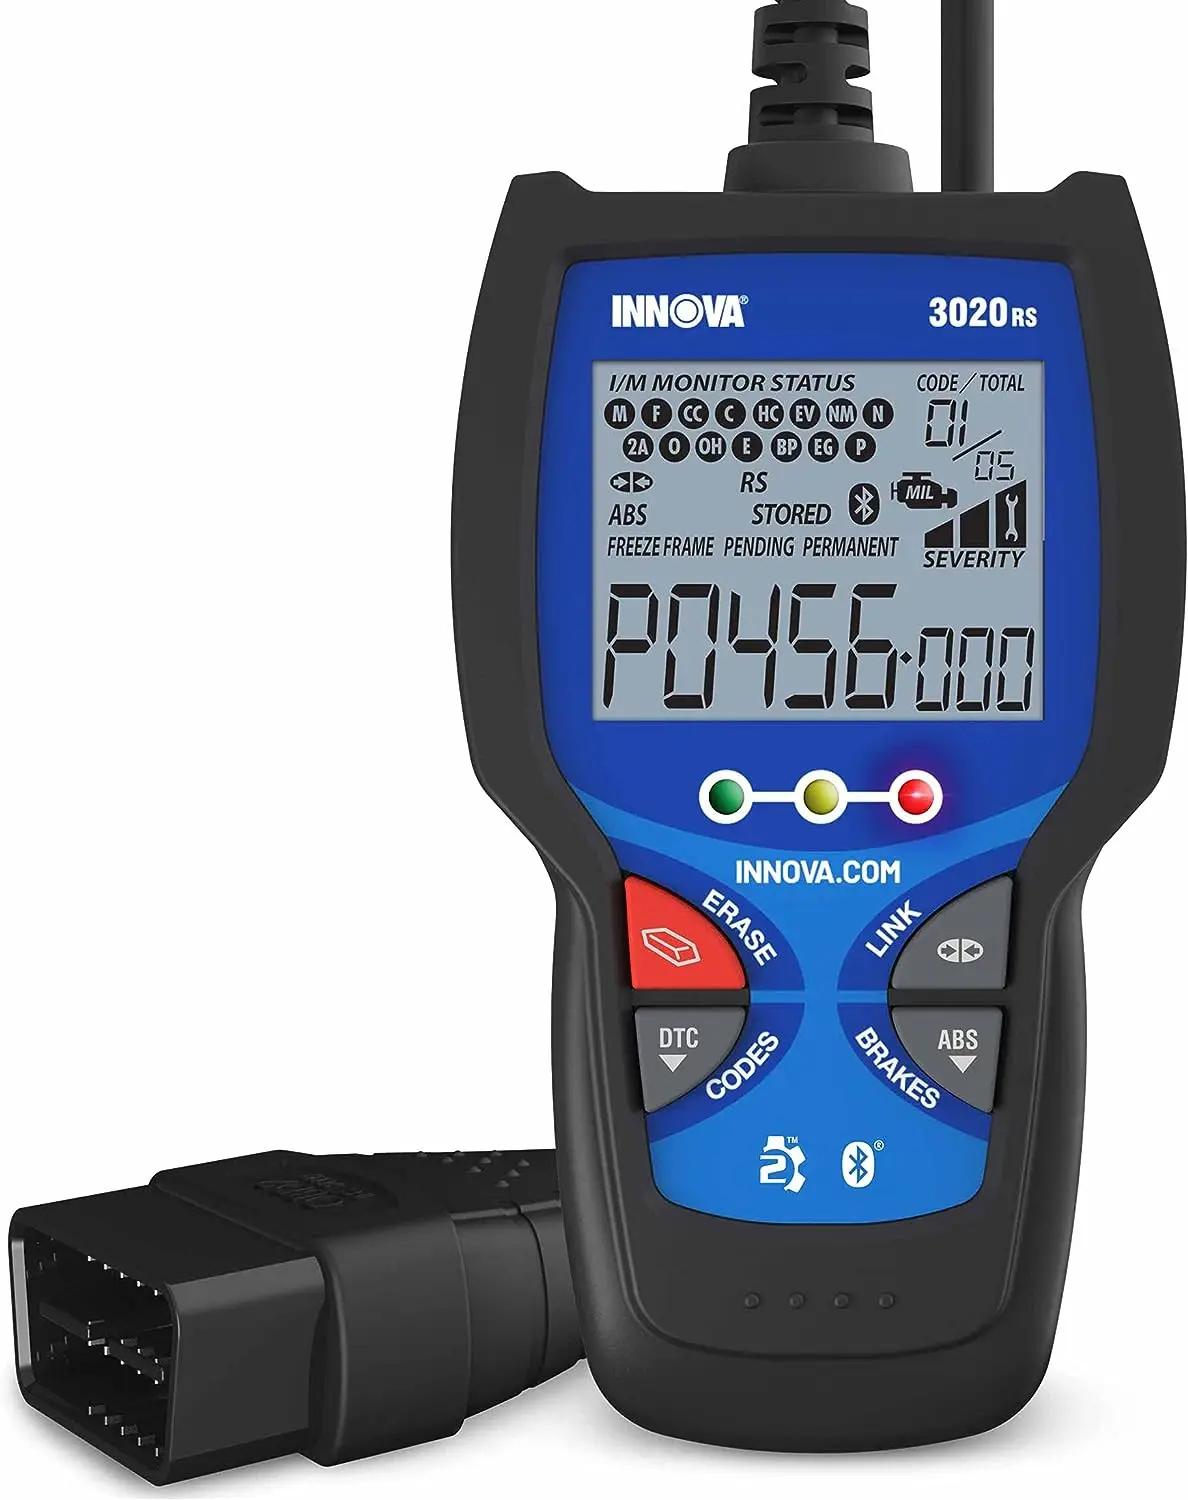 

Fast & Easy-to-Use Check Engine Code Reader, OBD2 Scan tool for ABS Clear with Fix & Part Recommendations, Maintenance S